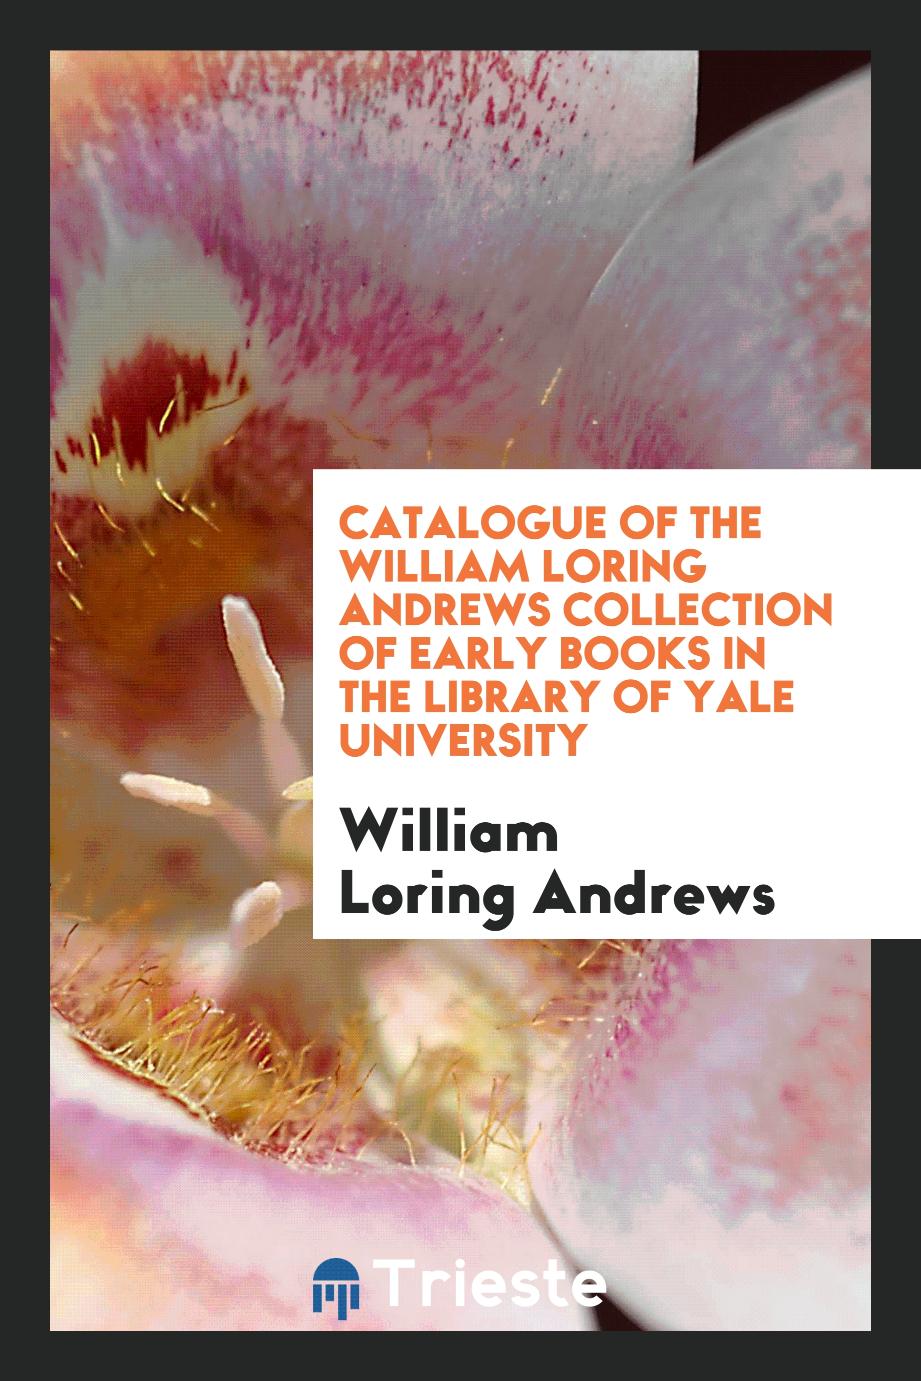 Catalogue of the William Loring Andrews Collection of Early Books in the library of yale university